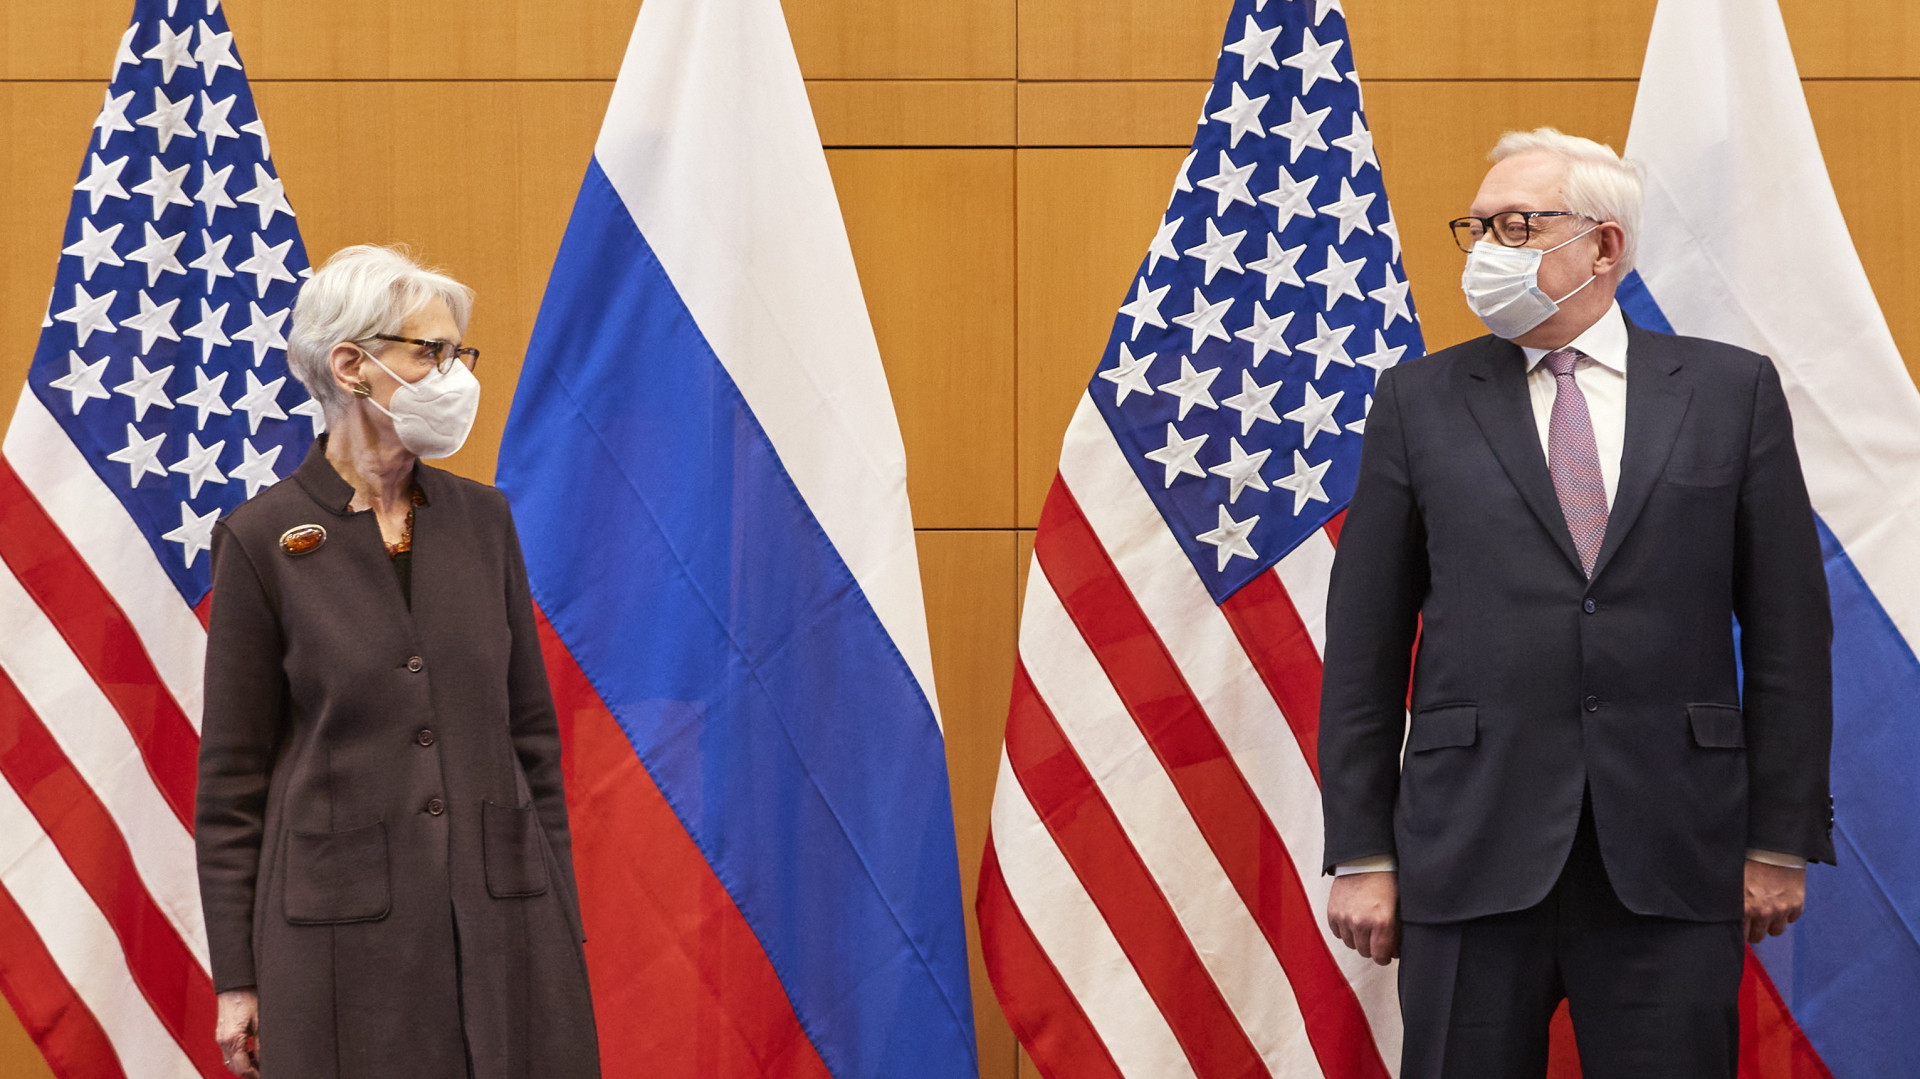 Tensions remain, and negotiations between America and Russia have ended without progress